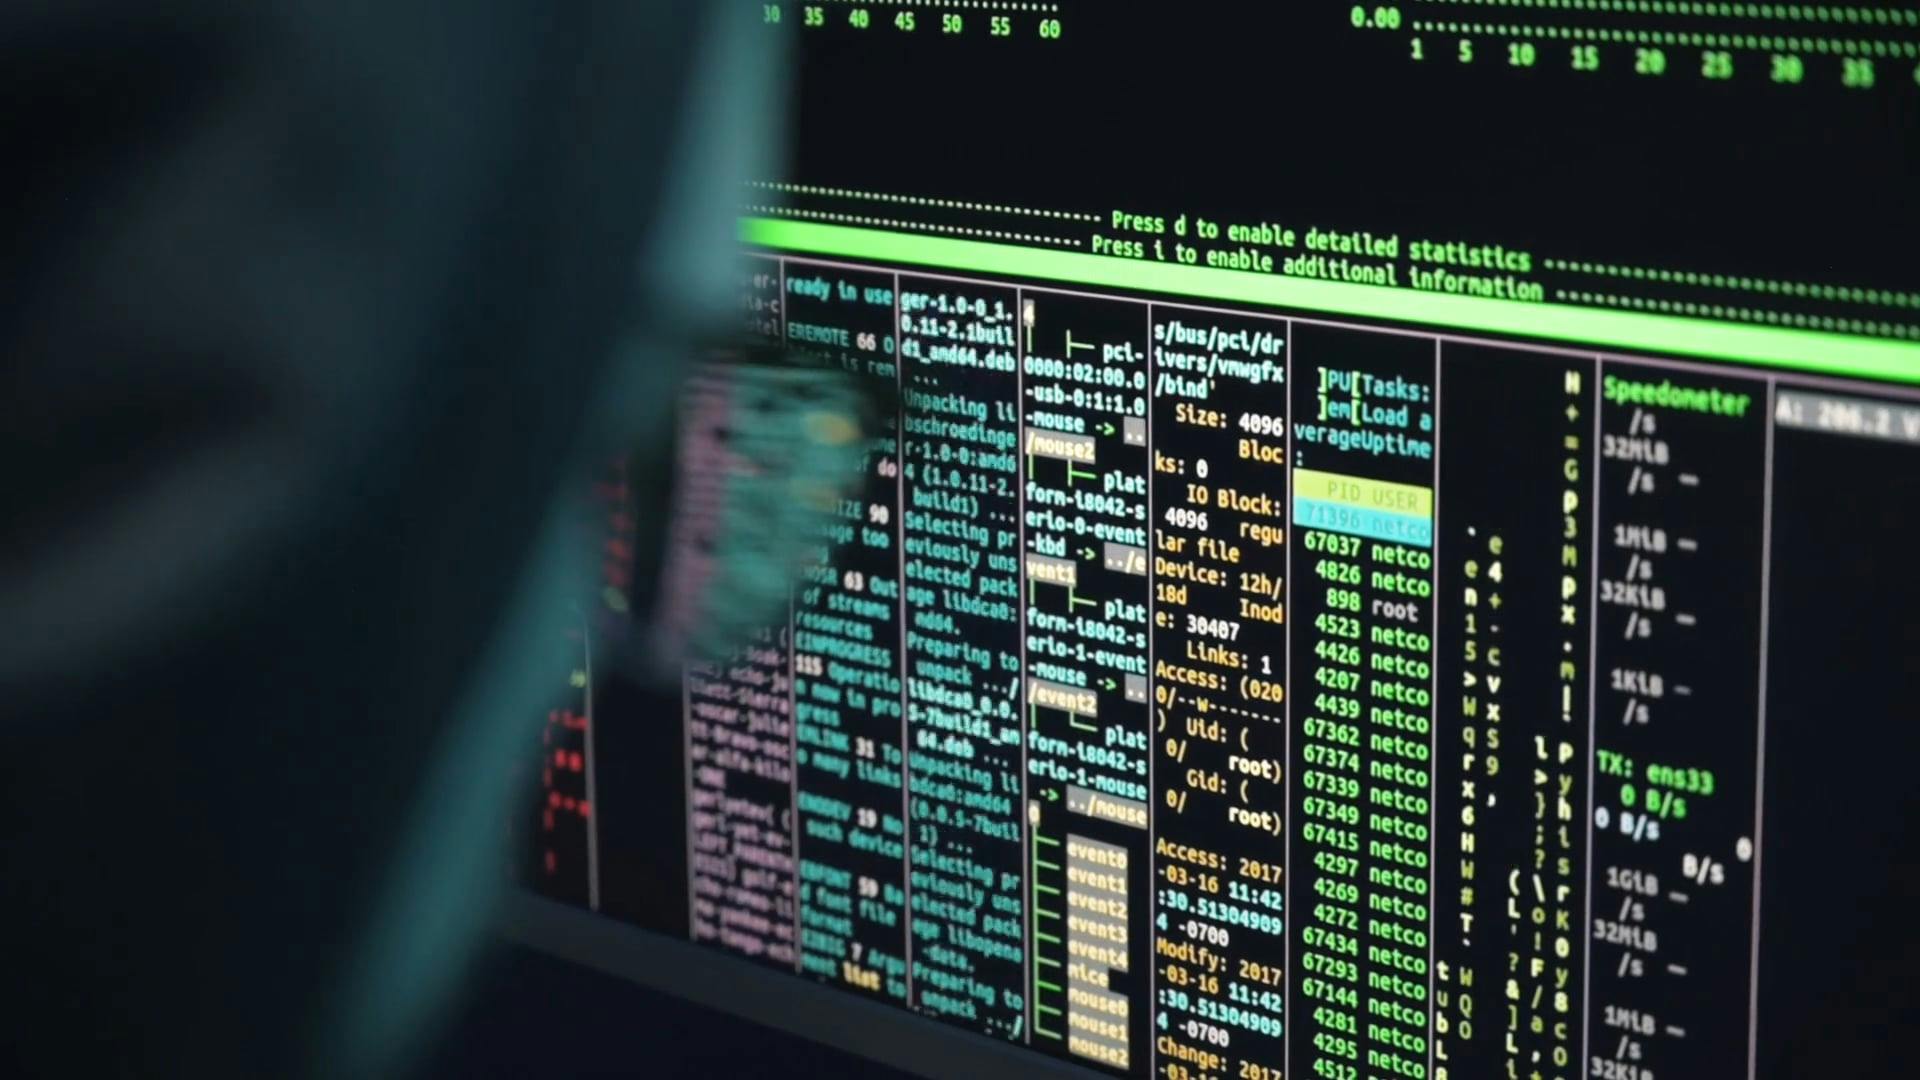 1,528 Hacking Wallpaper Stock Video Footage - 4K and HD Video Clips |  Shutterstock